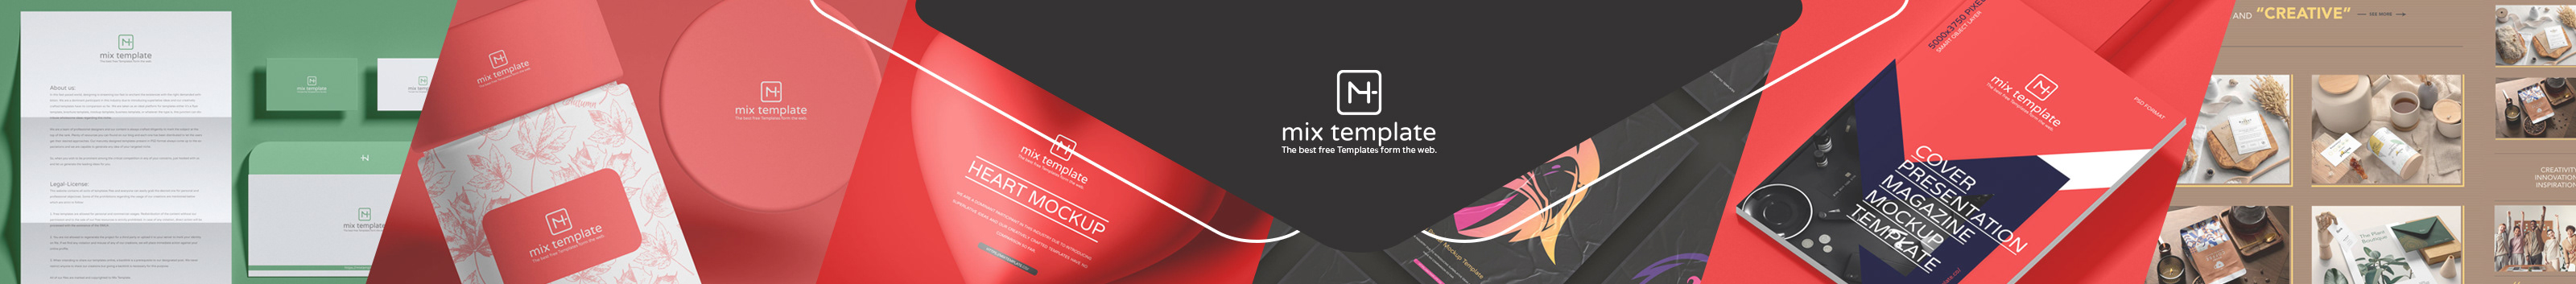 Mix Template's profile banner